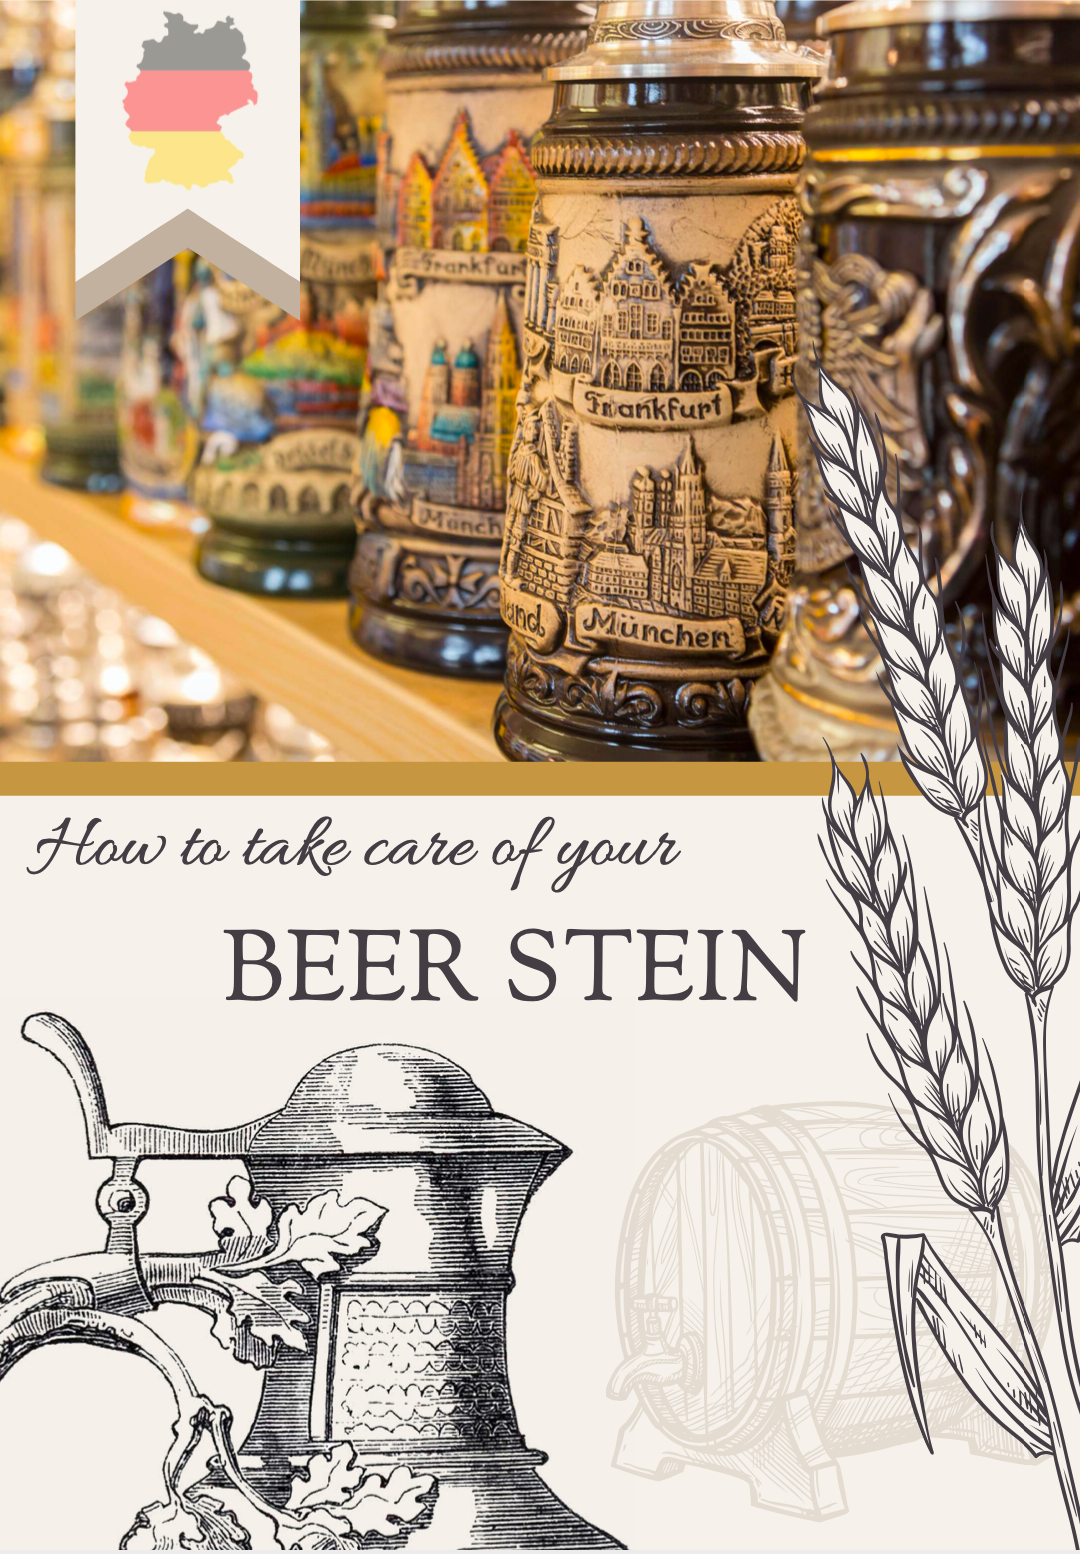 German beer stein care PDF made by The German Village Shop Hahndorf